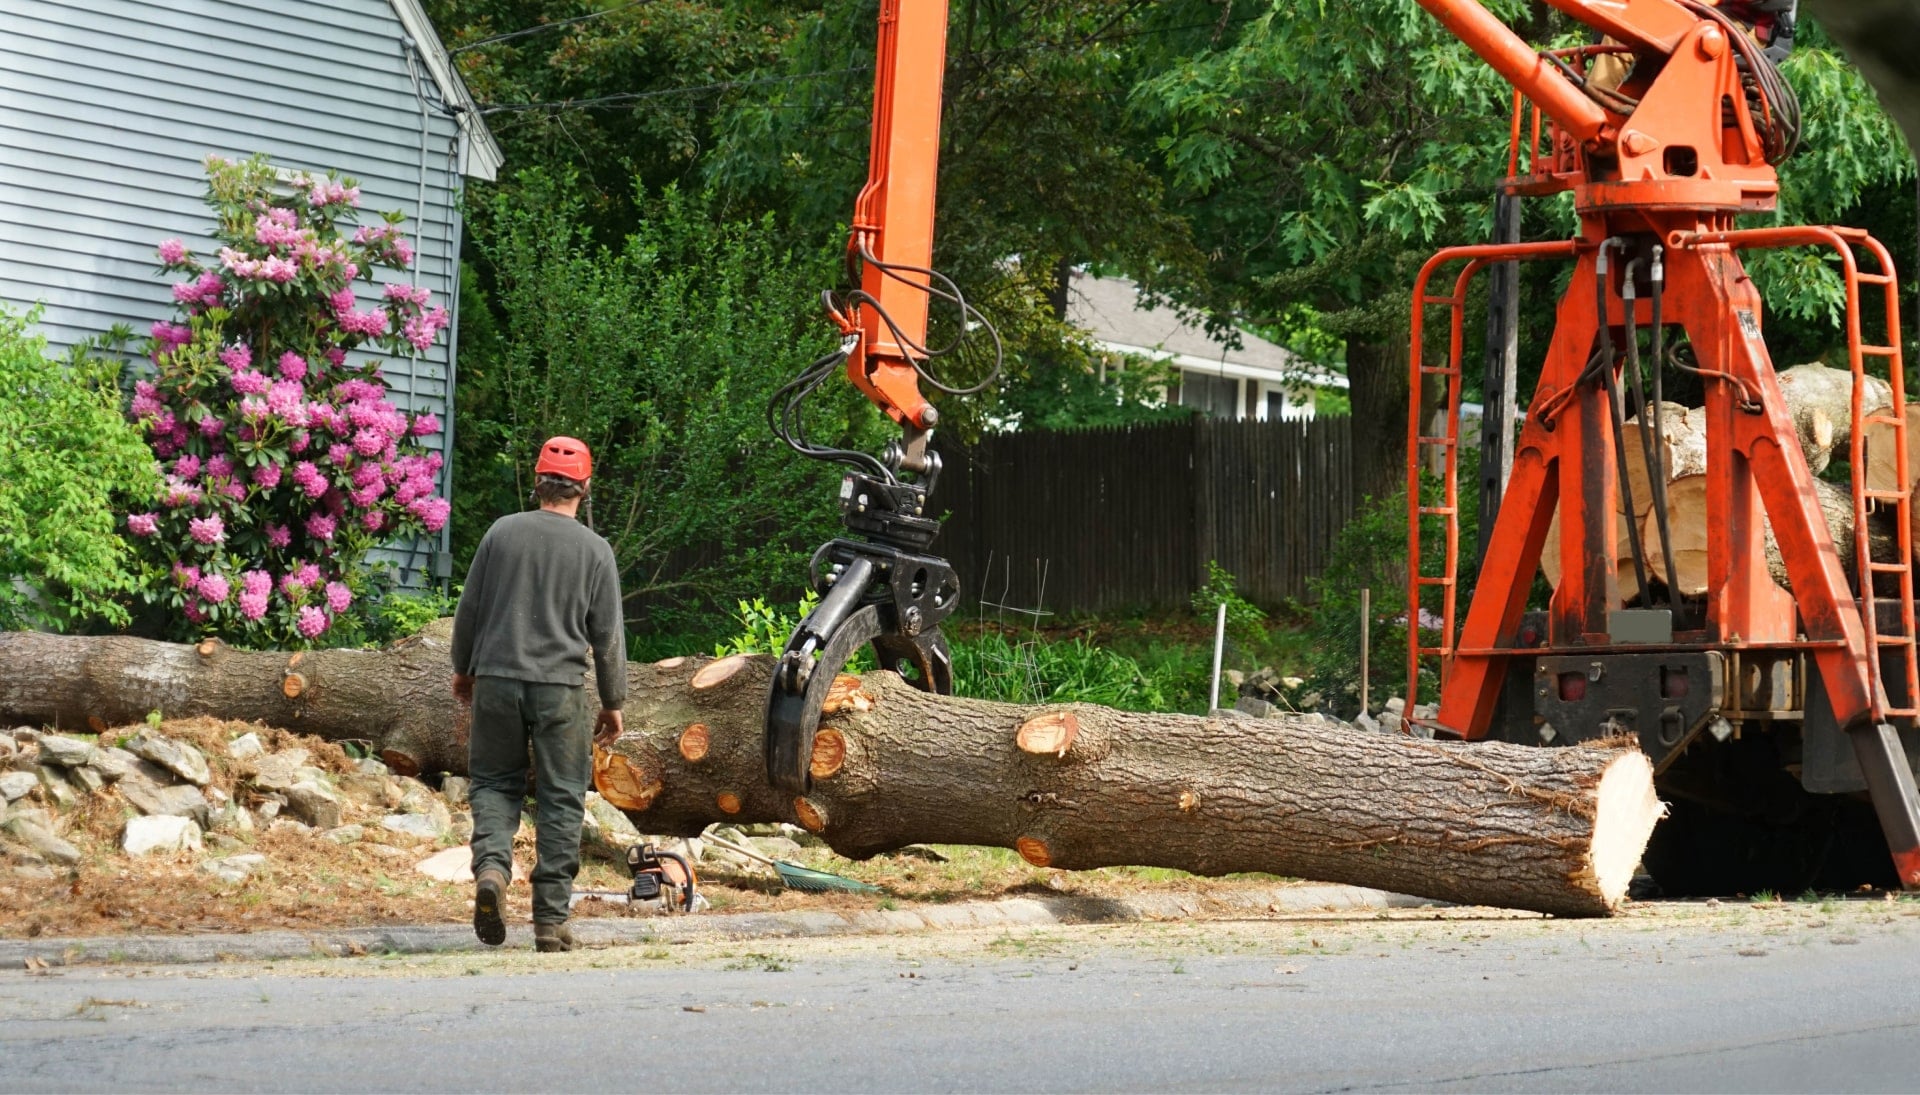 Local partner for Tree removal services in Kenosha